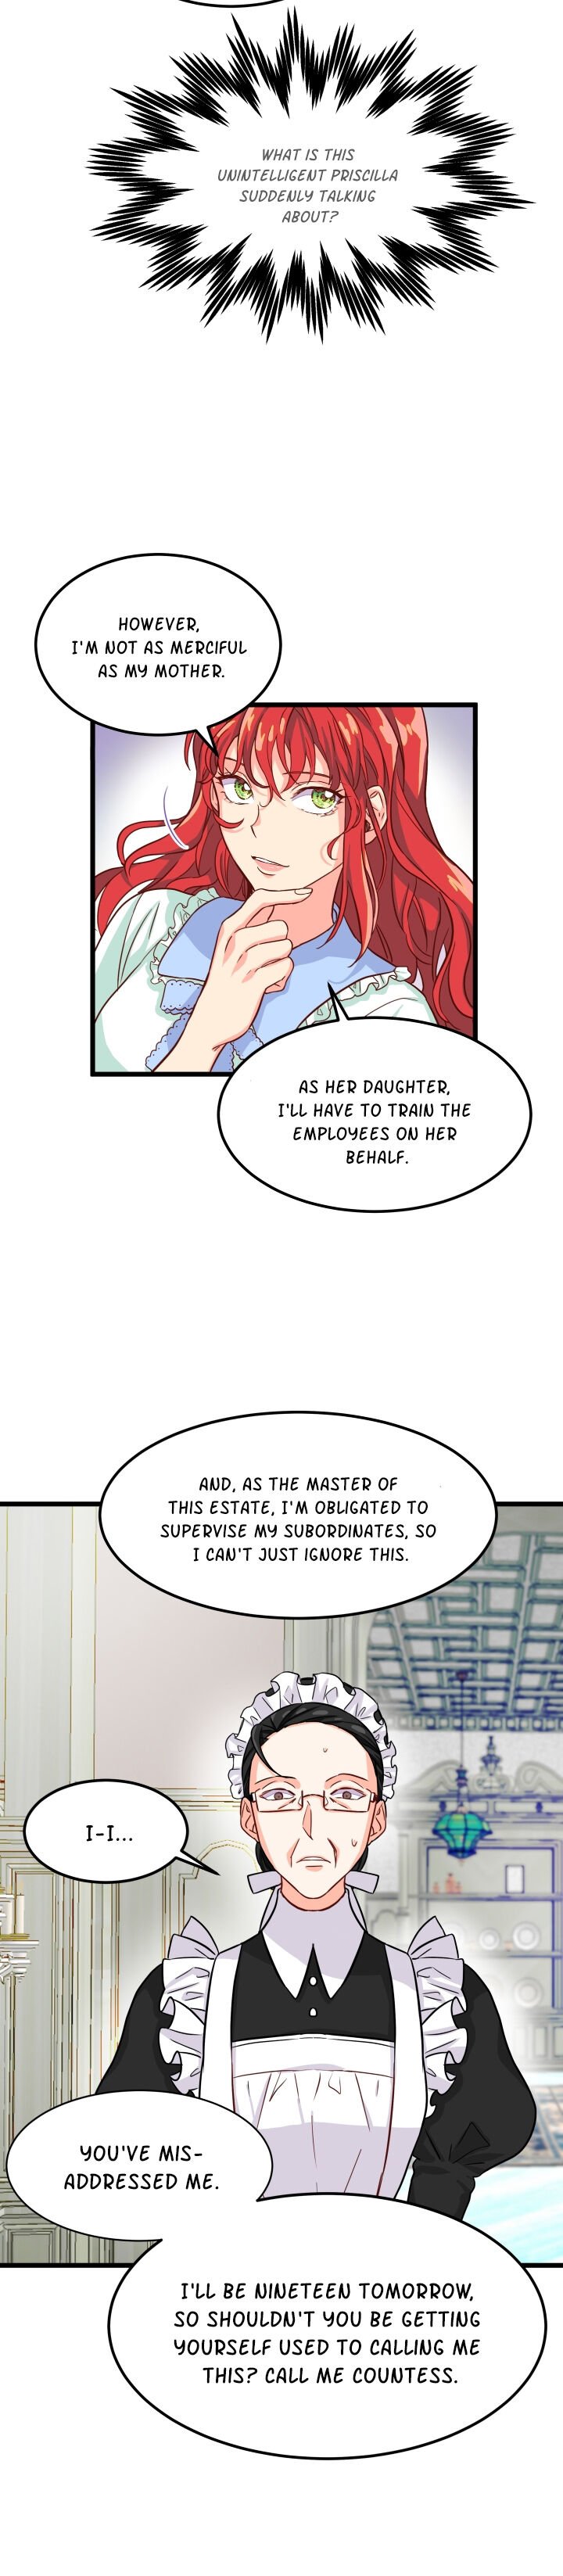 Priscilla’s Marriage Request Chapter 2 - Page 5